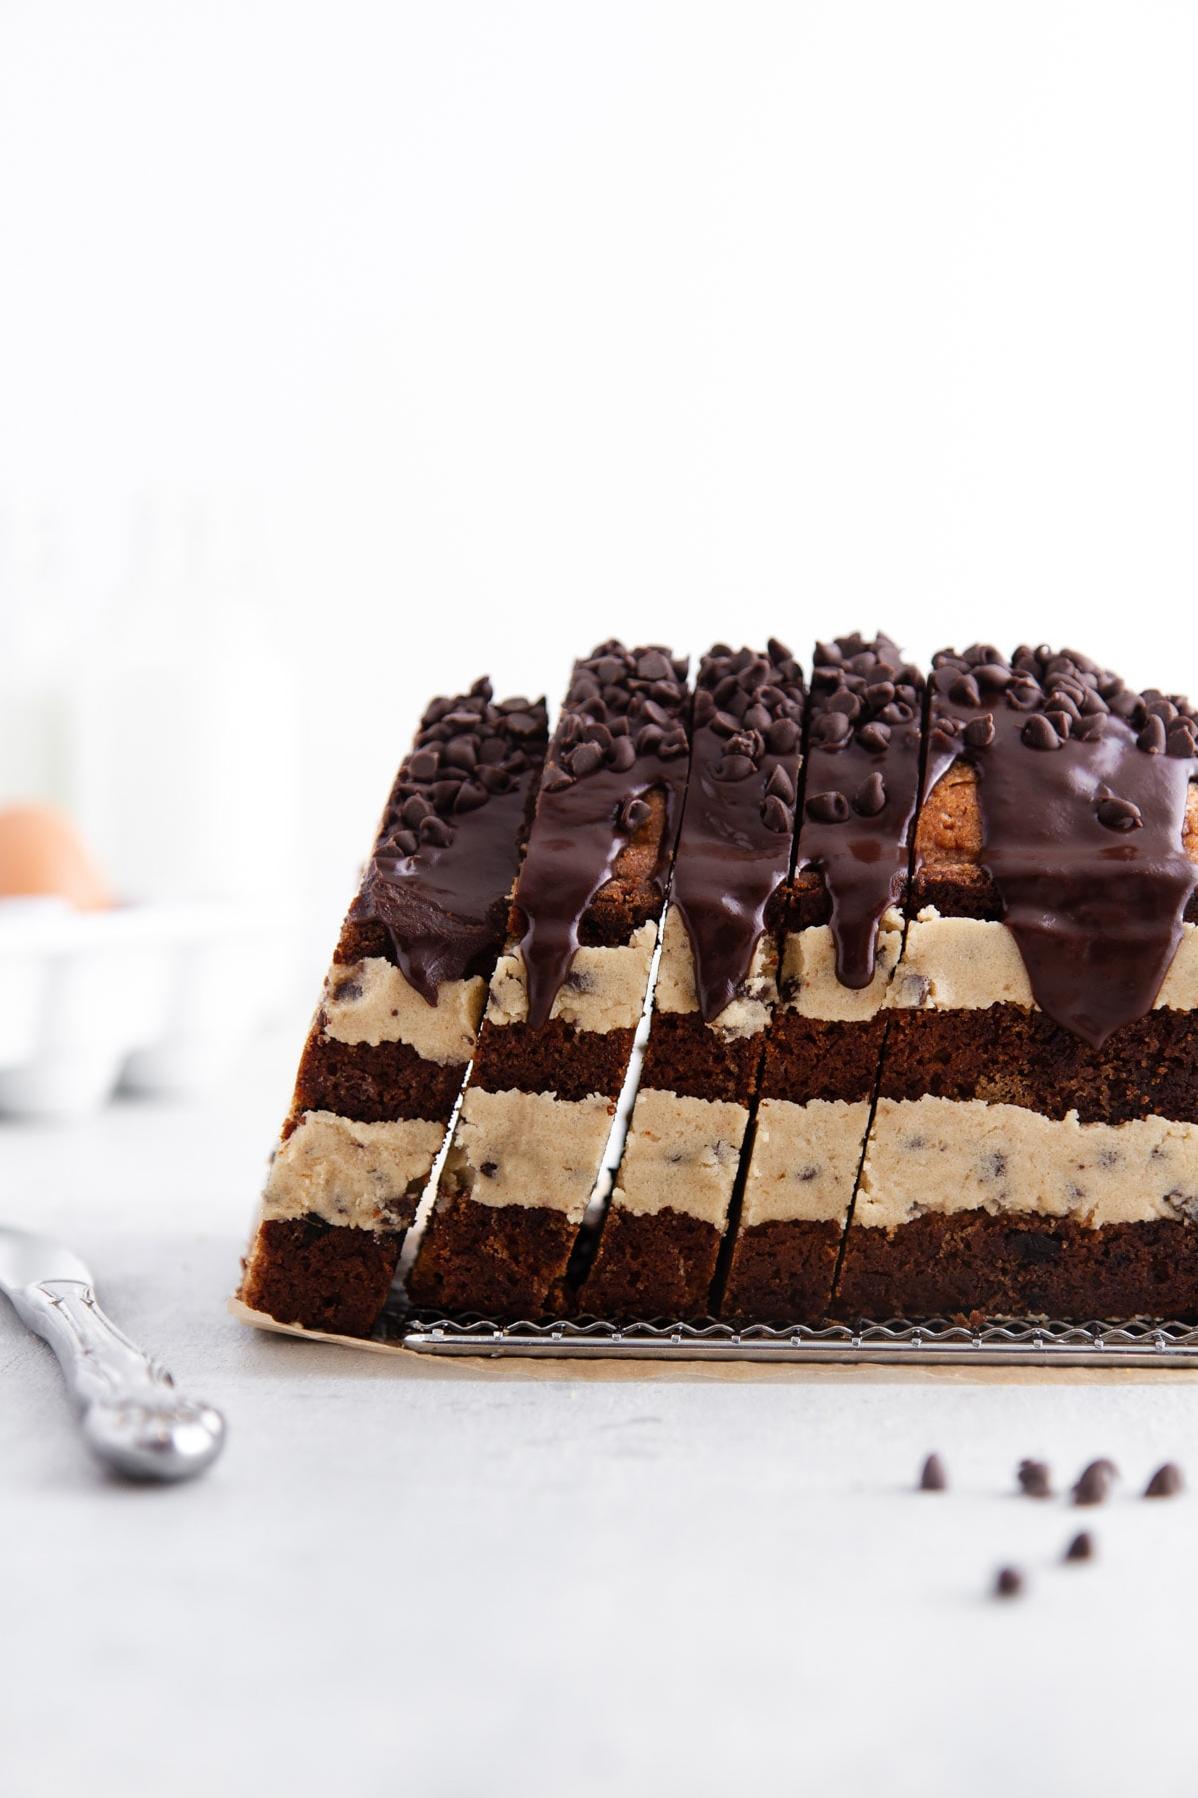  A combination of cookies and cake? Yes, please! You won't be able to resist a second slice.